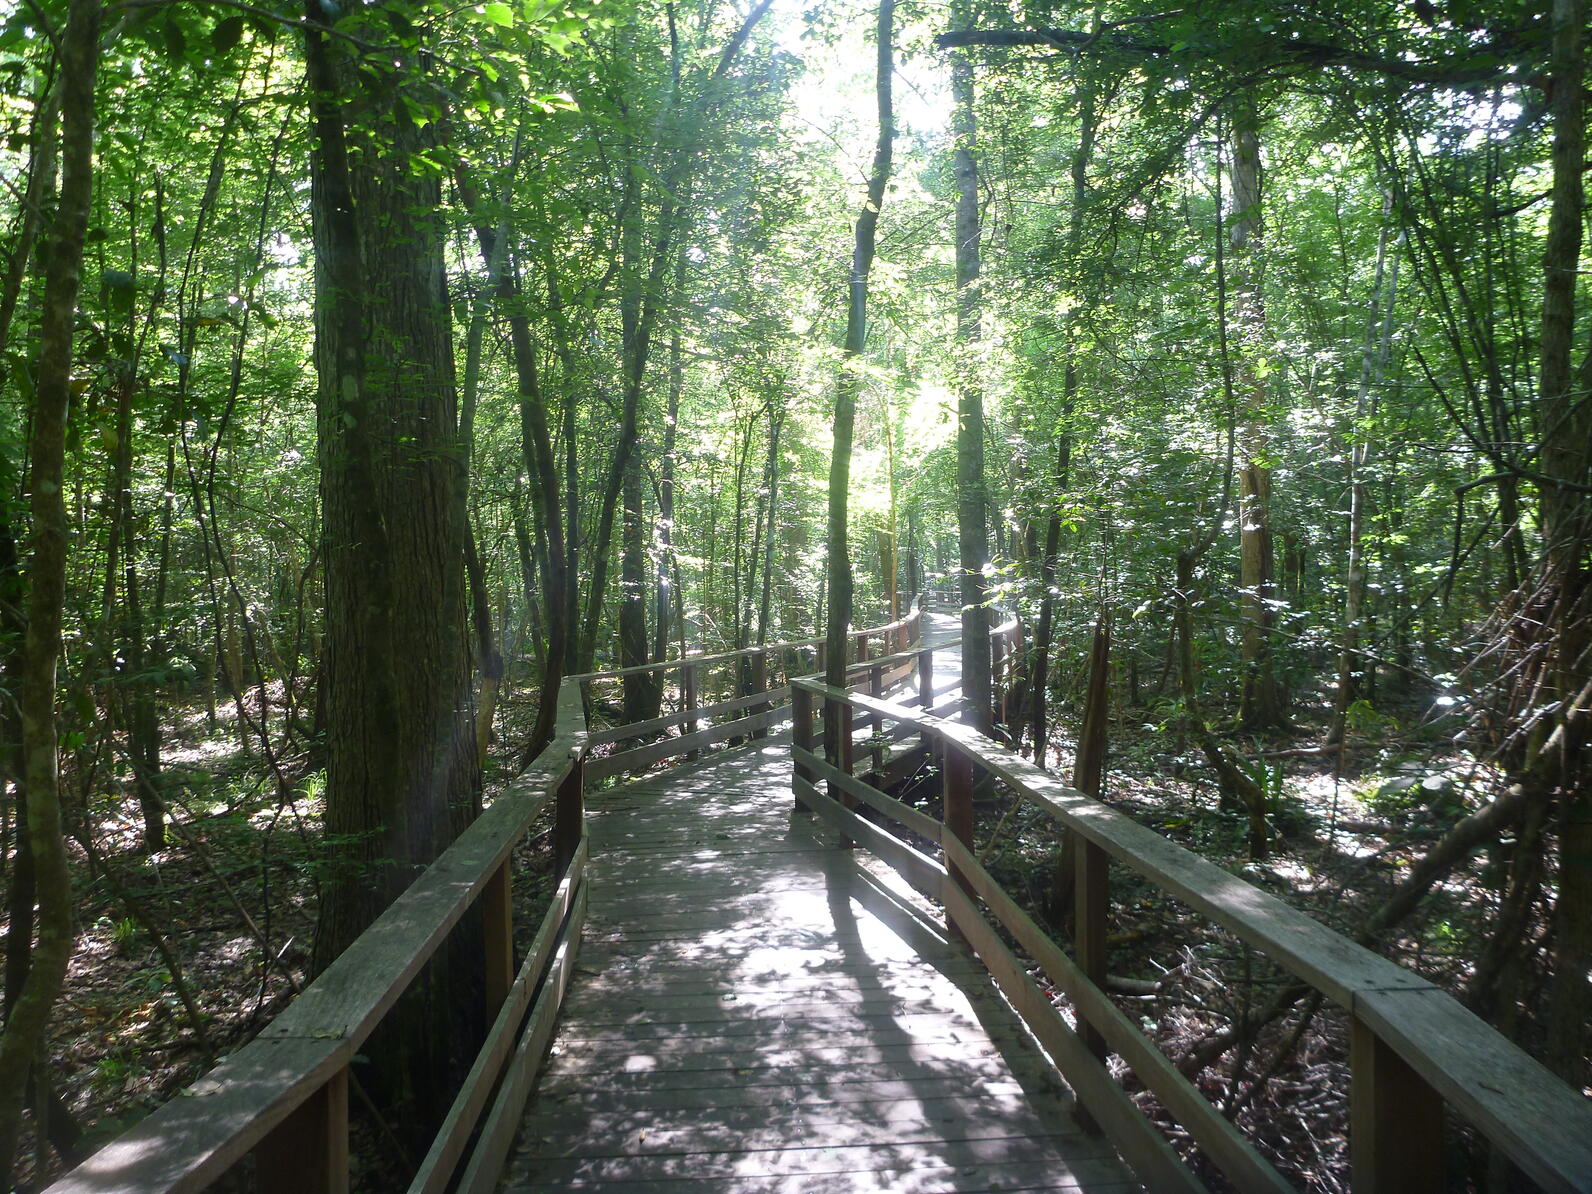 The Beidler boardwalk angles around a large pine tree on the left. This part of the boardwalk is low, the ground is covered in pinestraw, leaves, sticks, and so on. The sunlight cuts through the forest, reflecting off multiple smooth leaves.